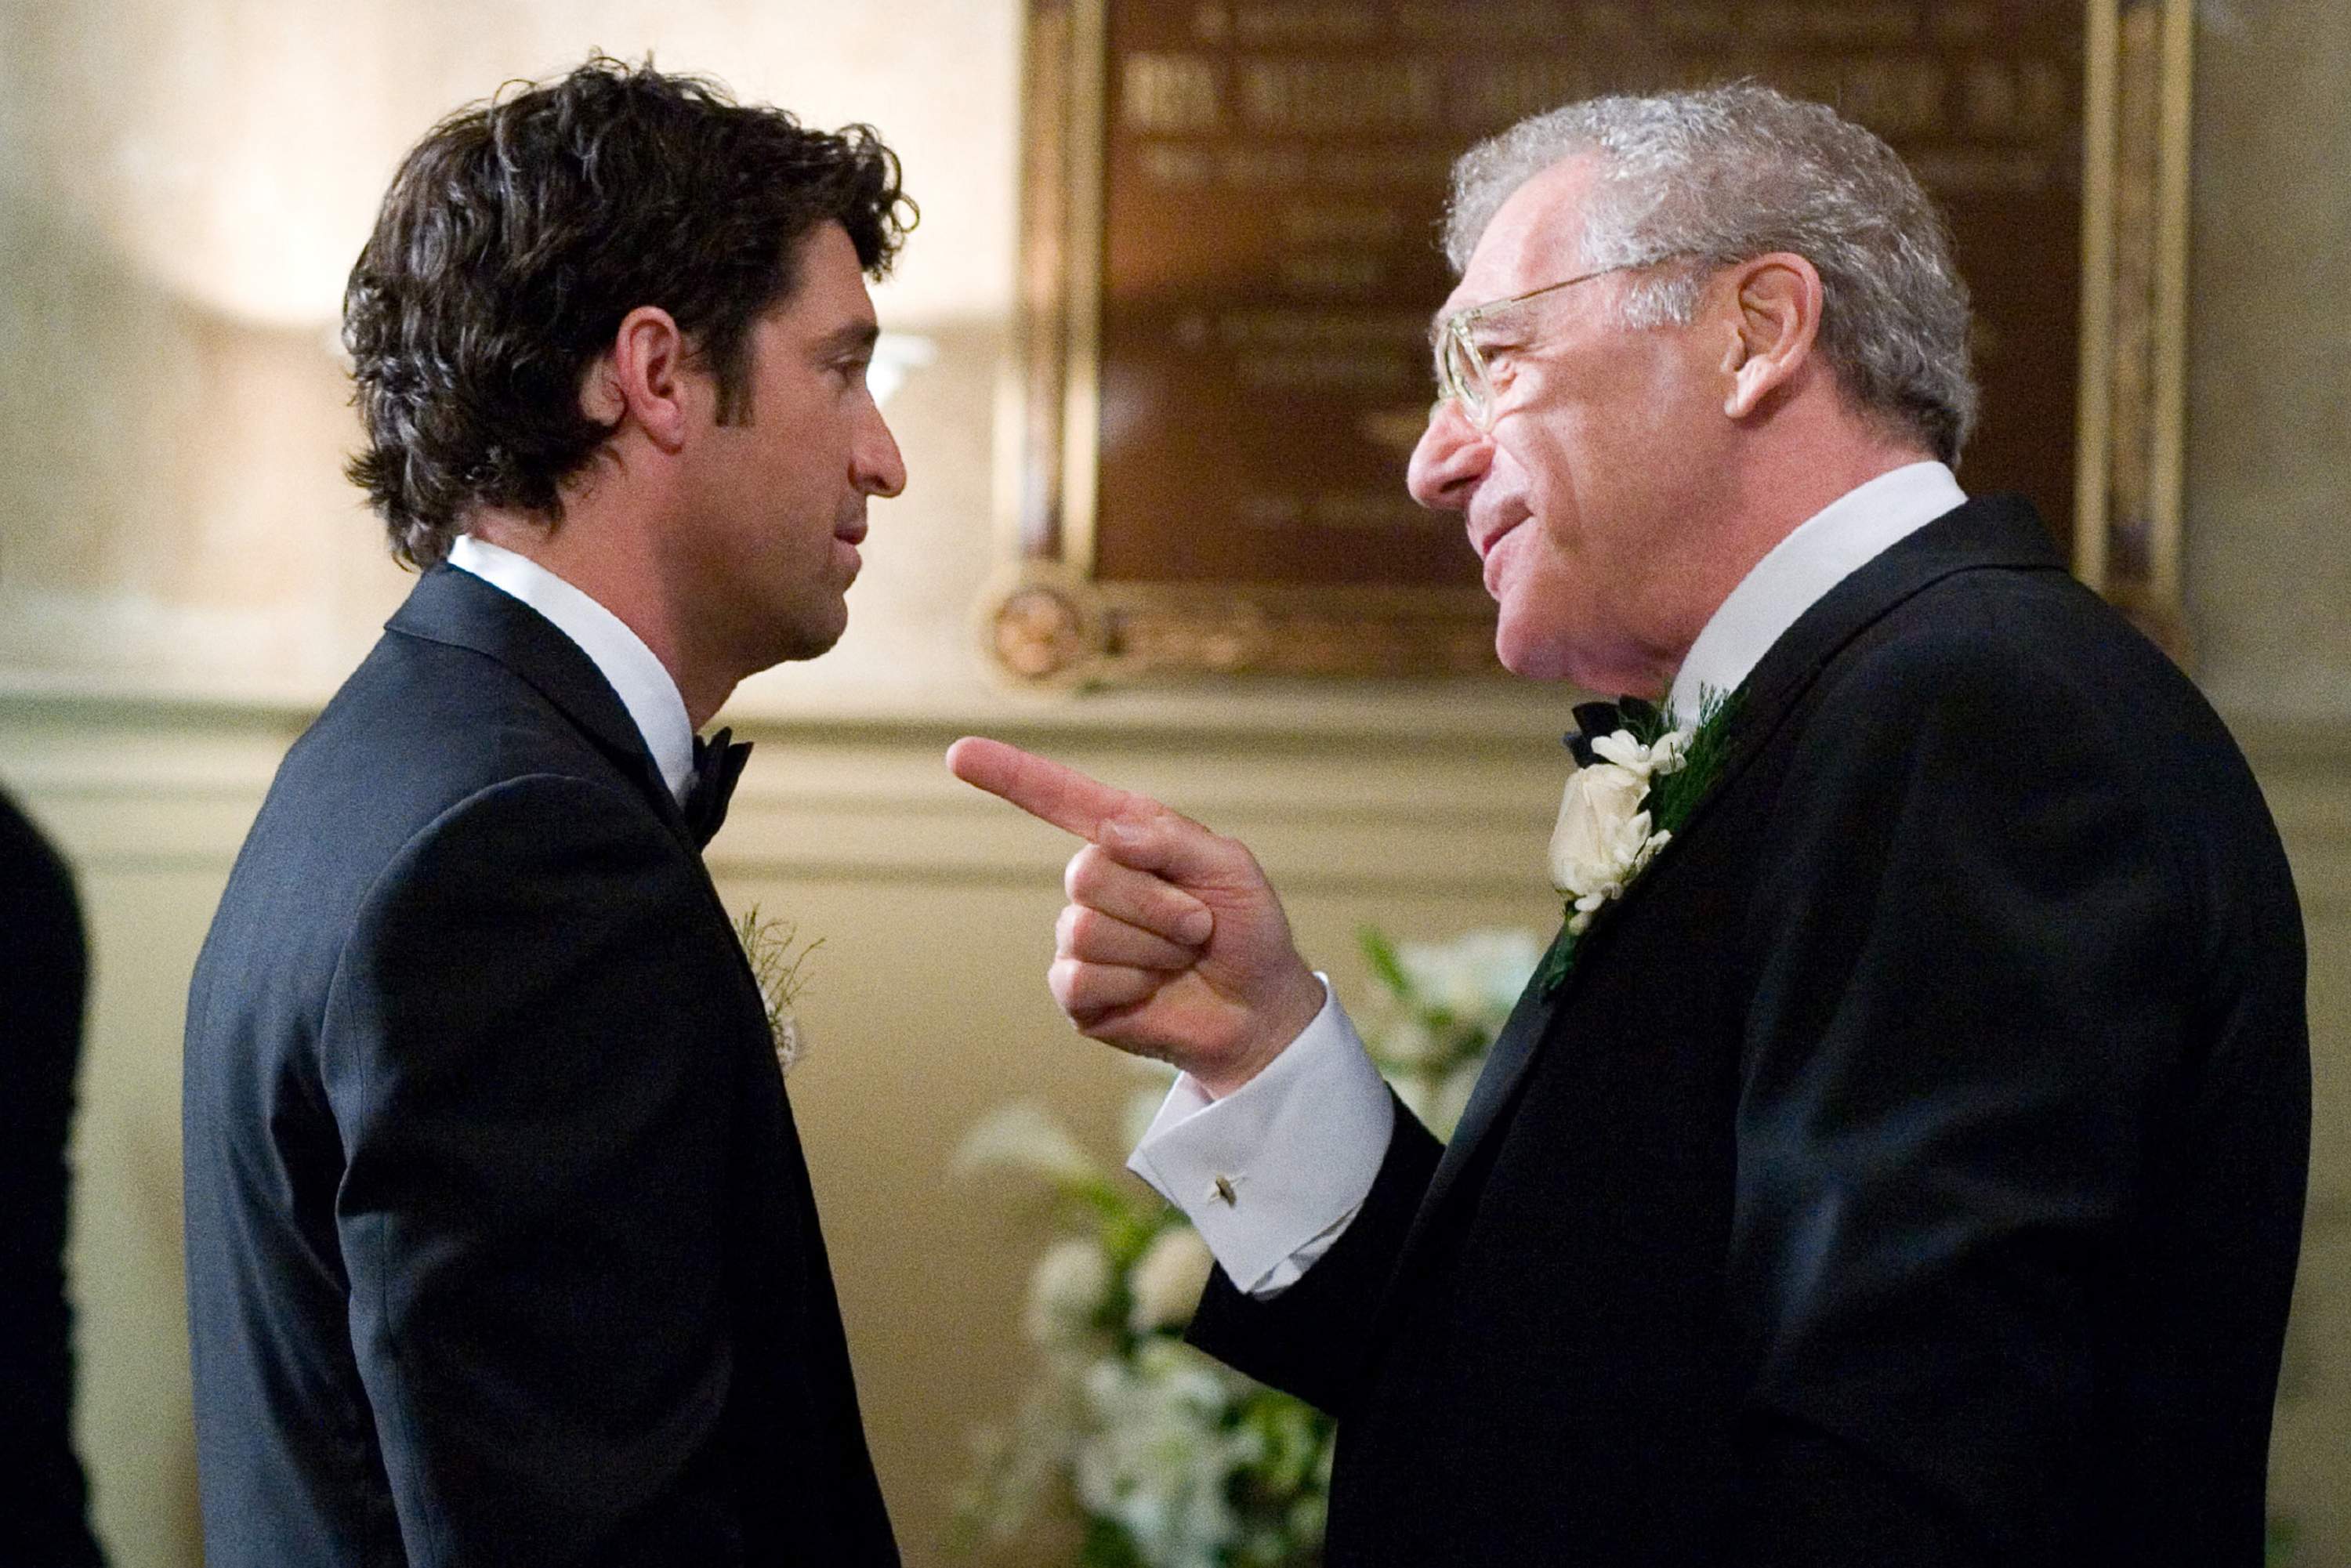 Patrick Dempsey stars as Tom and Sydney Pollack as his father, Tom Sr. in Columbia Pictures' Made of Honor (2008). Photo credit: Peter Iovino.